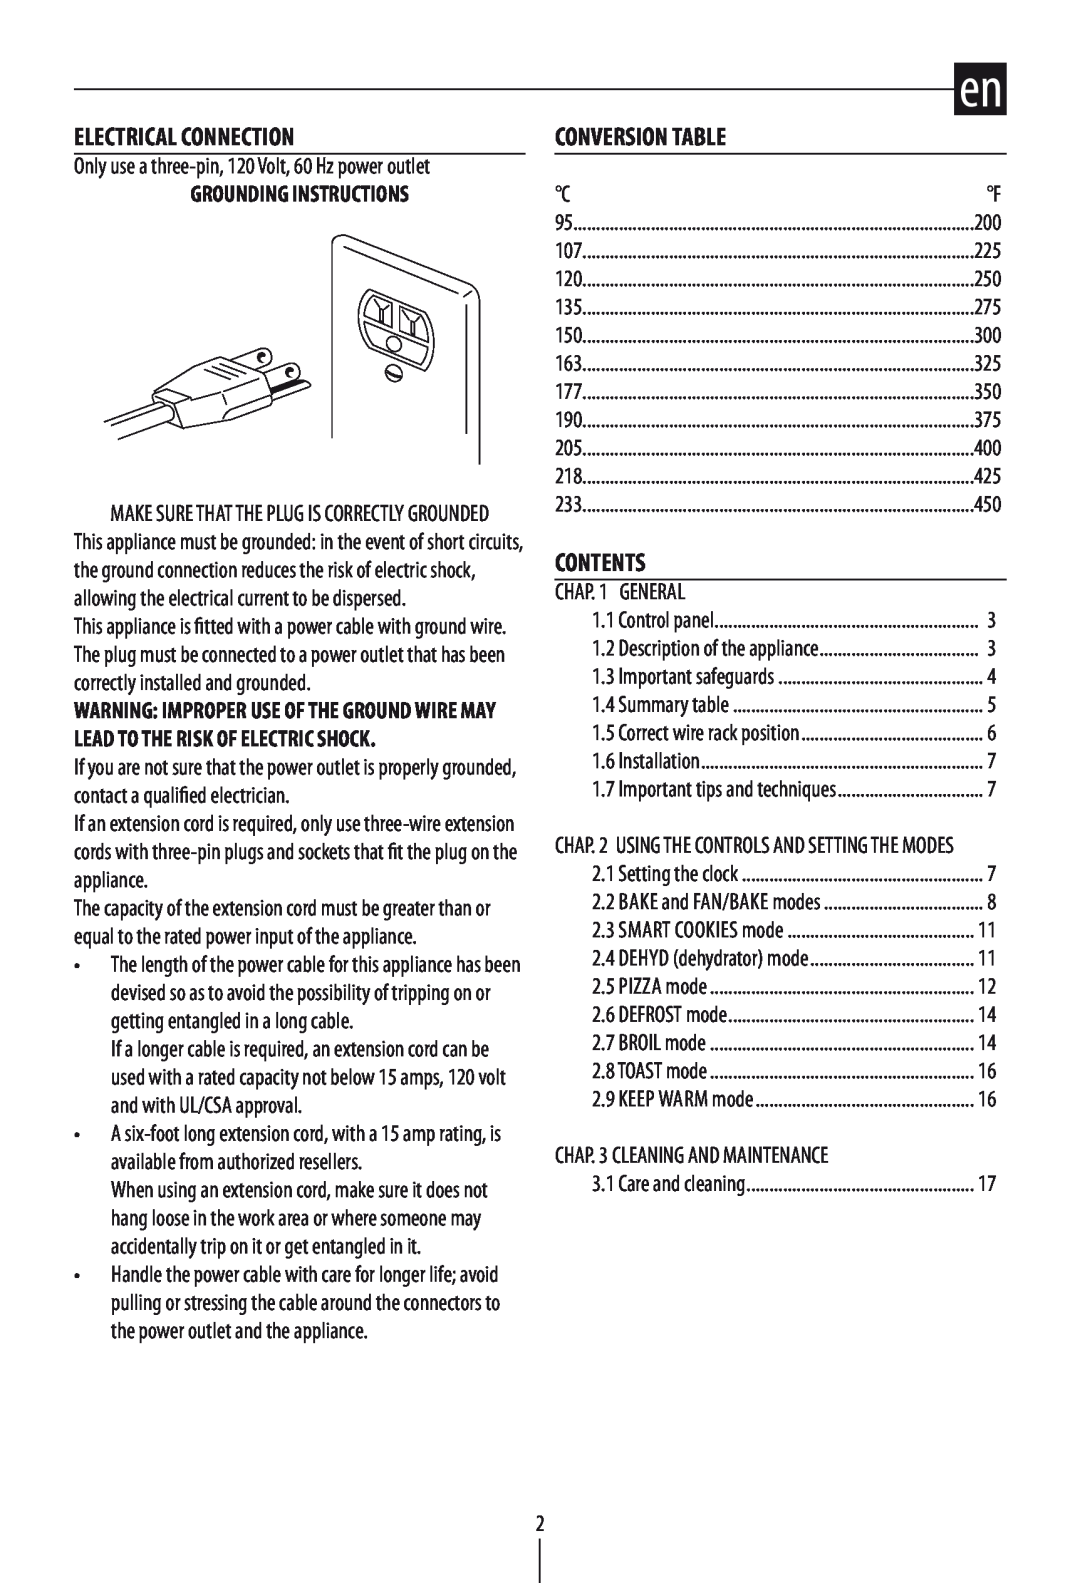 DeLonghi DO1289 manual Electrical Connection, Conversion Table, Contents, Grounding Instructions 